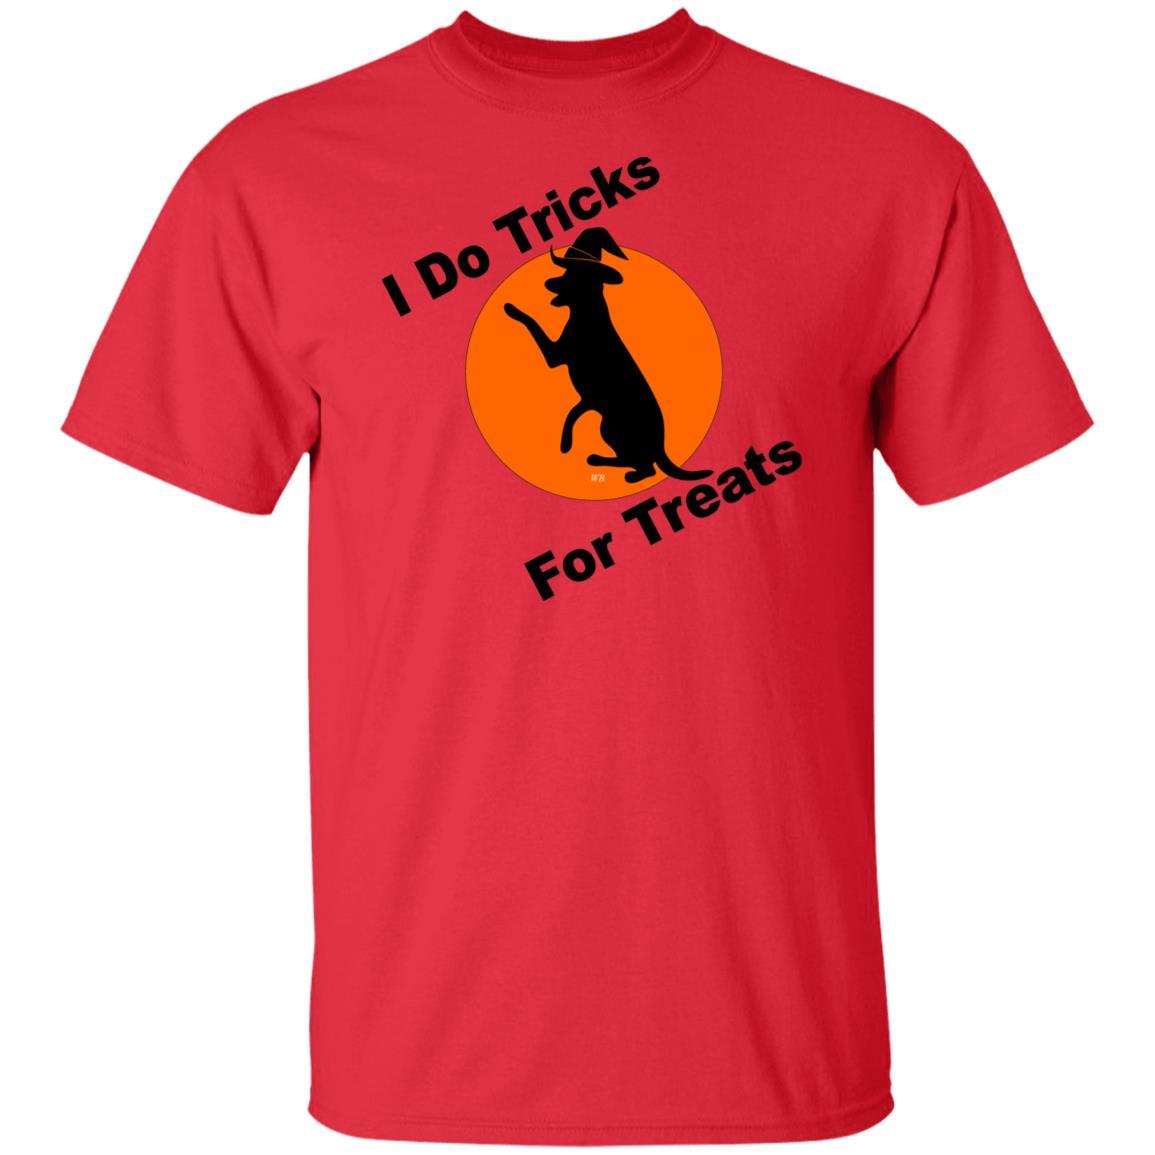 T-Shirts Red / S WineyBitches.Co "I Do Tricks For Treats" Dog- Ultra Cotton T-Shirt WineyBitchesCo